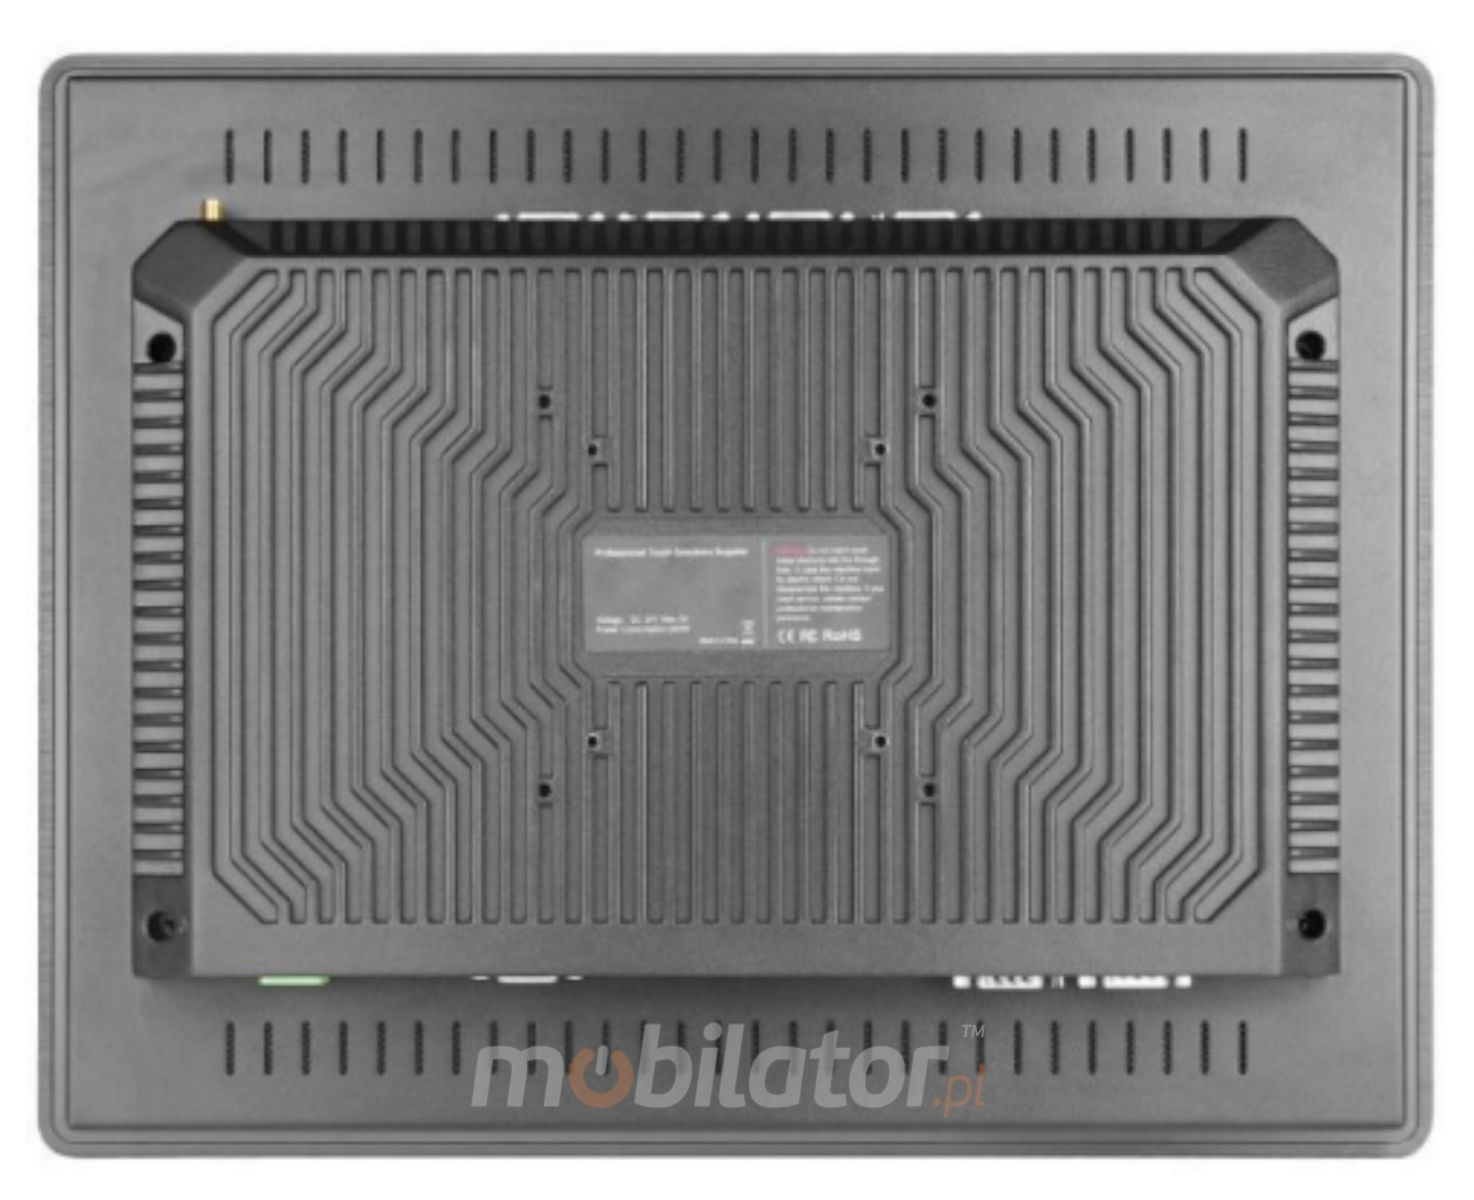 Back of the capacitive plate BIBOX-150PC2 with cooling, robust